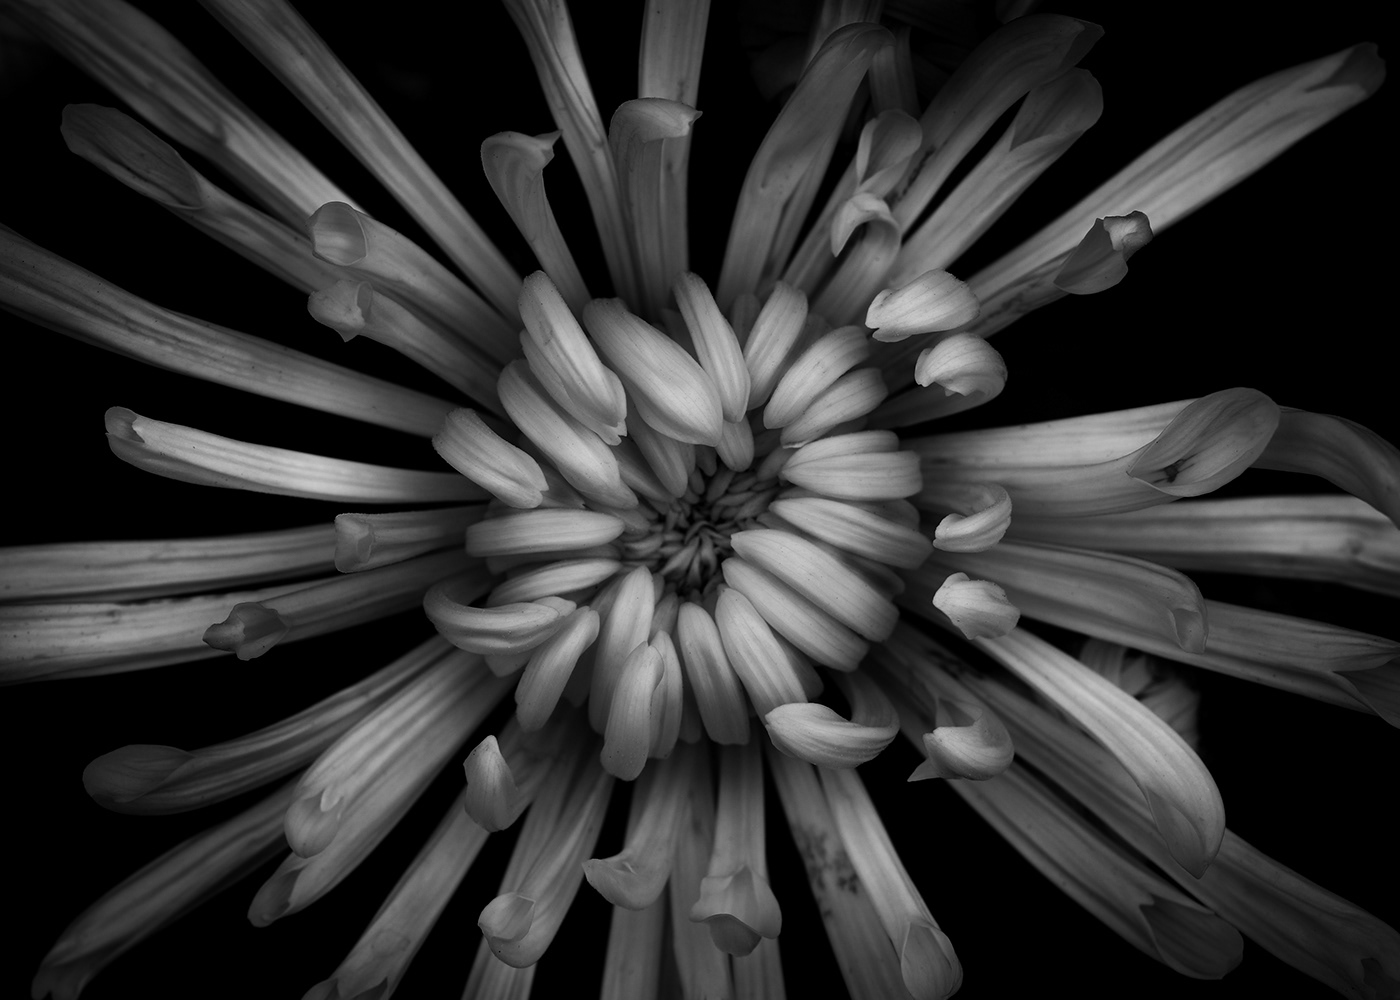 Flowers floral Nature black and white texture abstract fine art Chrysanthemum